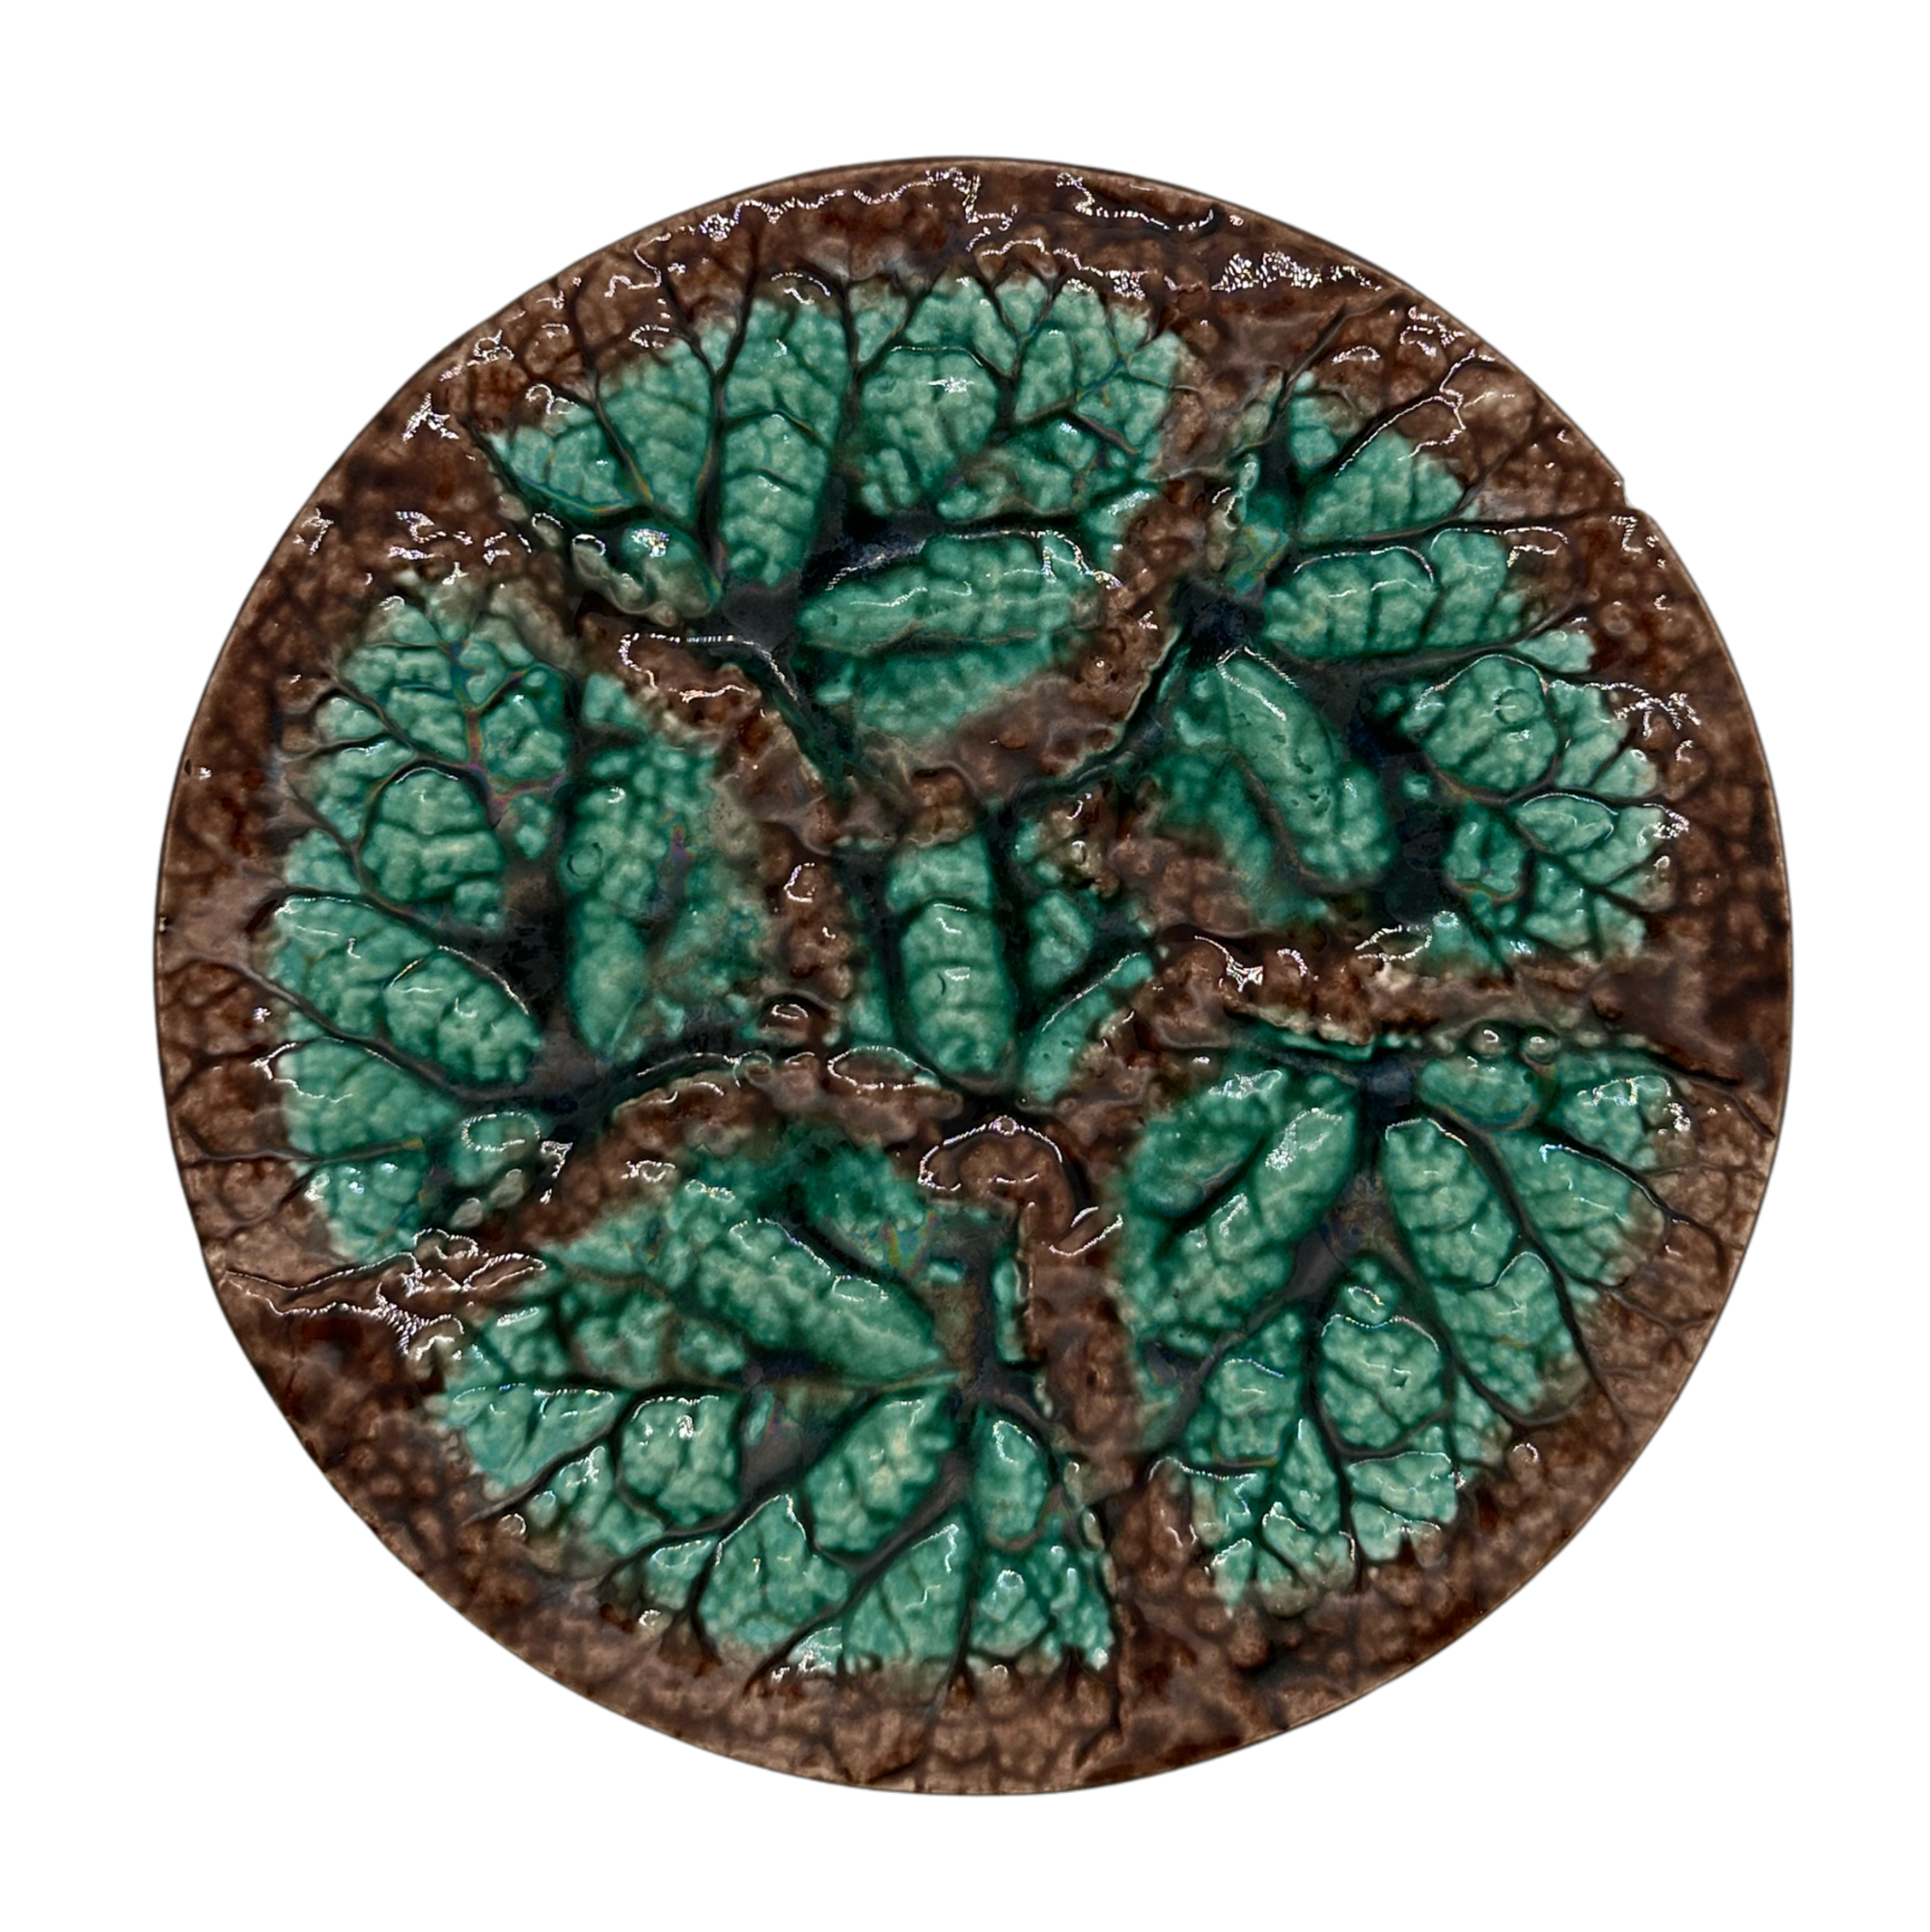 Antique Majolica Plate with Foliage Texture - Hunt and Bloom